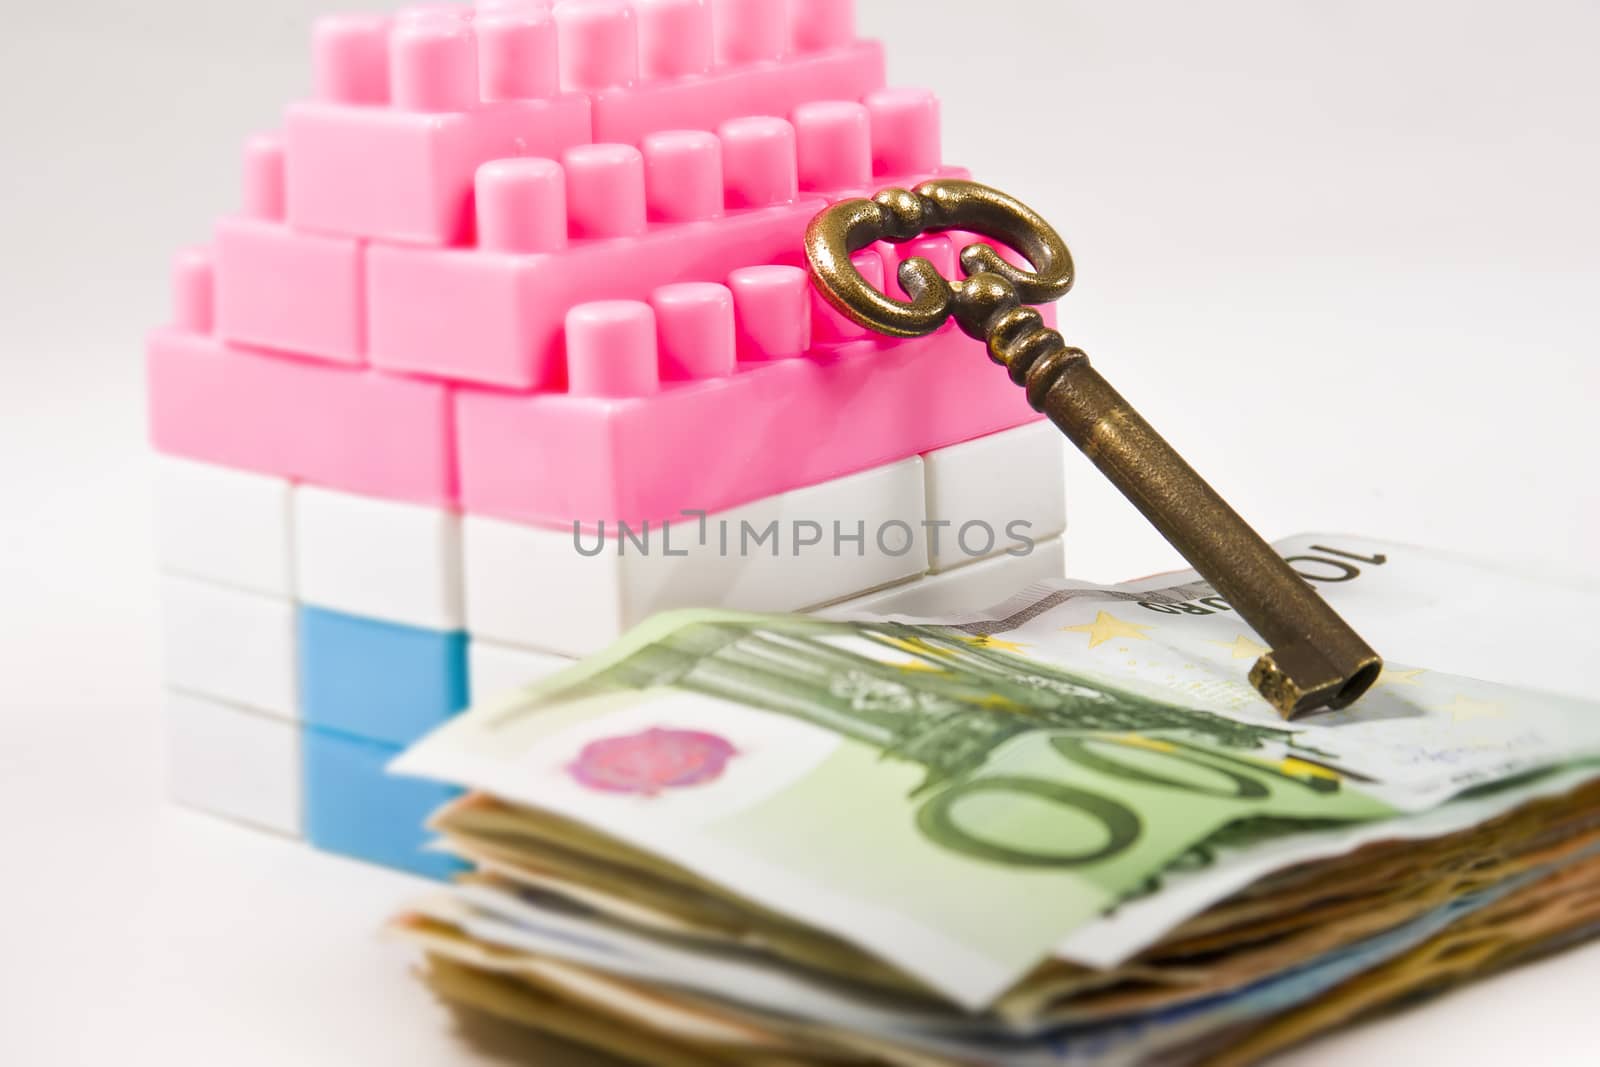 Banknotes pile,Miniature House and Key by ocusfocus